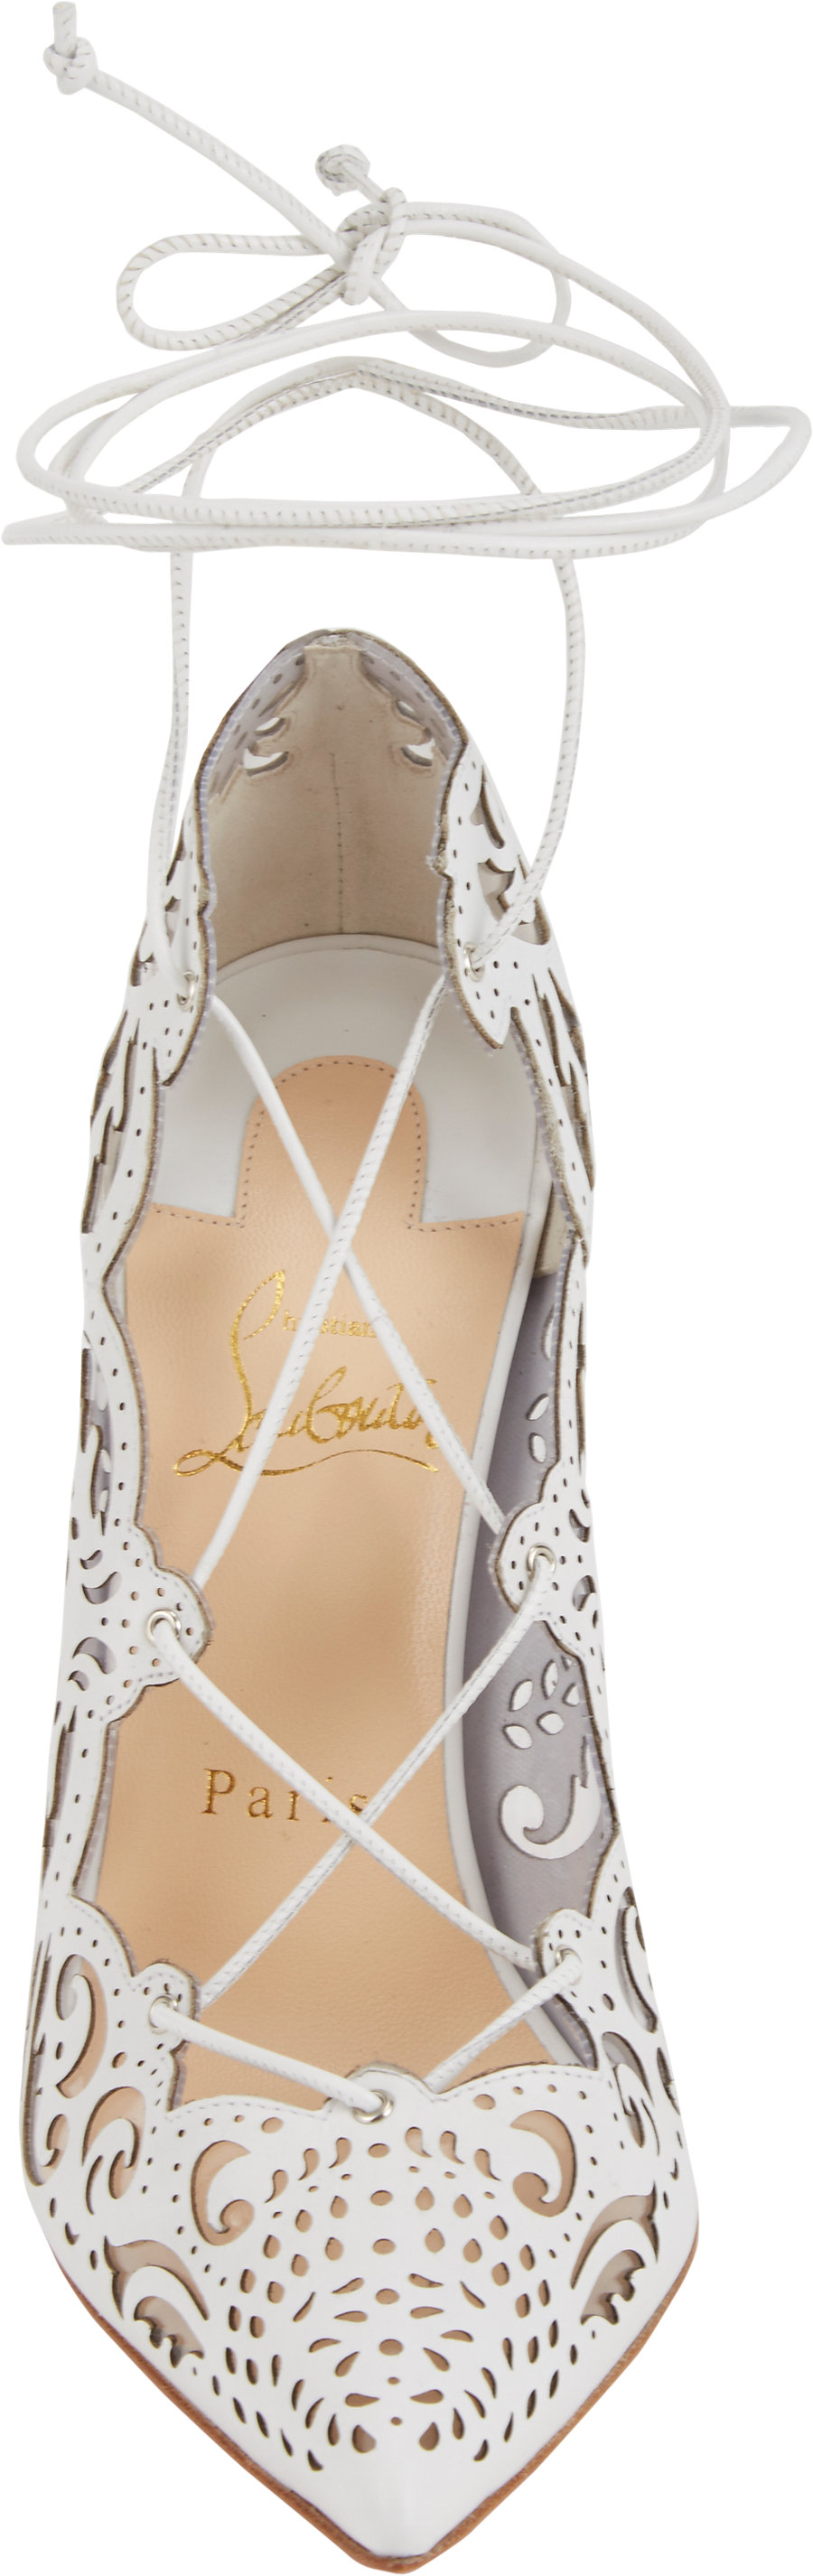 christian louboutin replica shoes in miami | Straight Jacket Legends